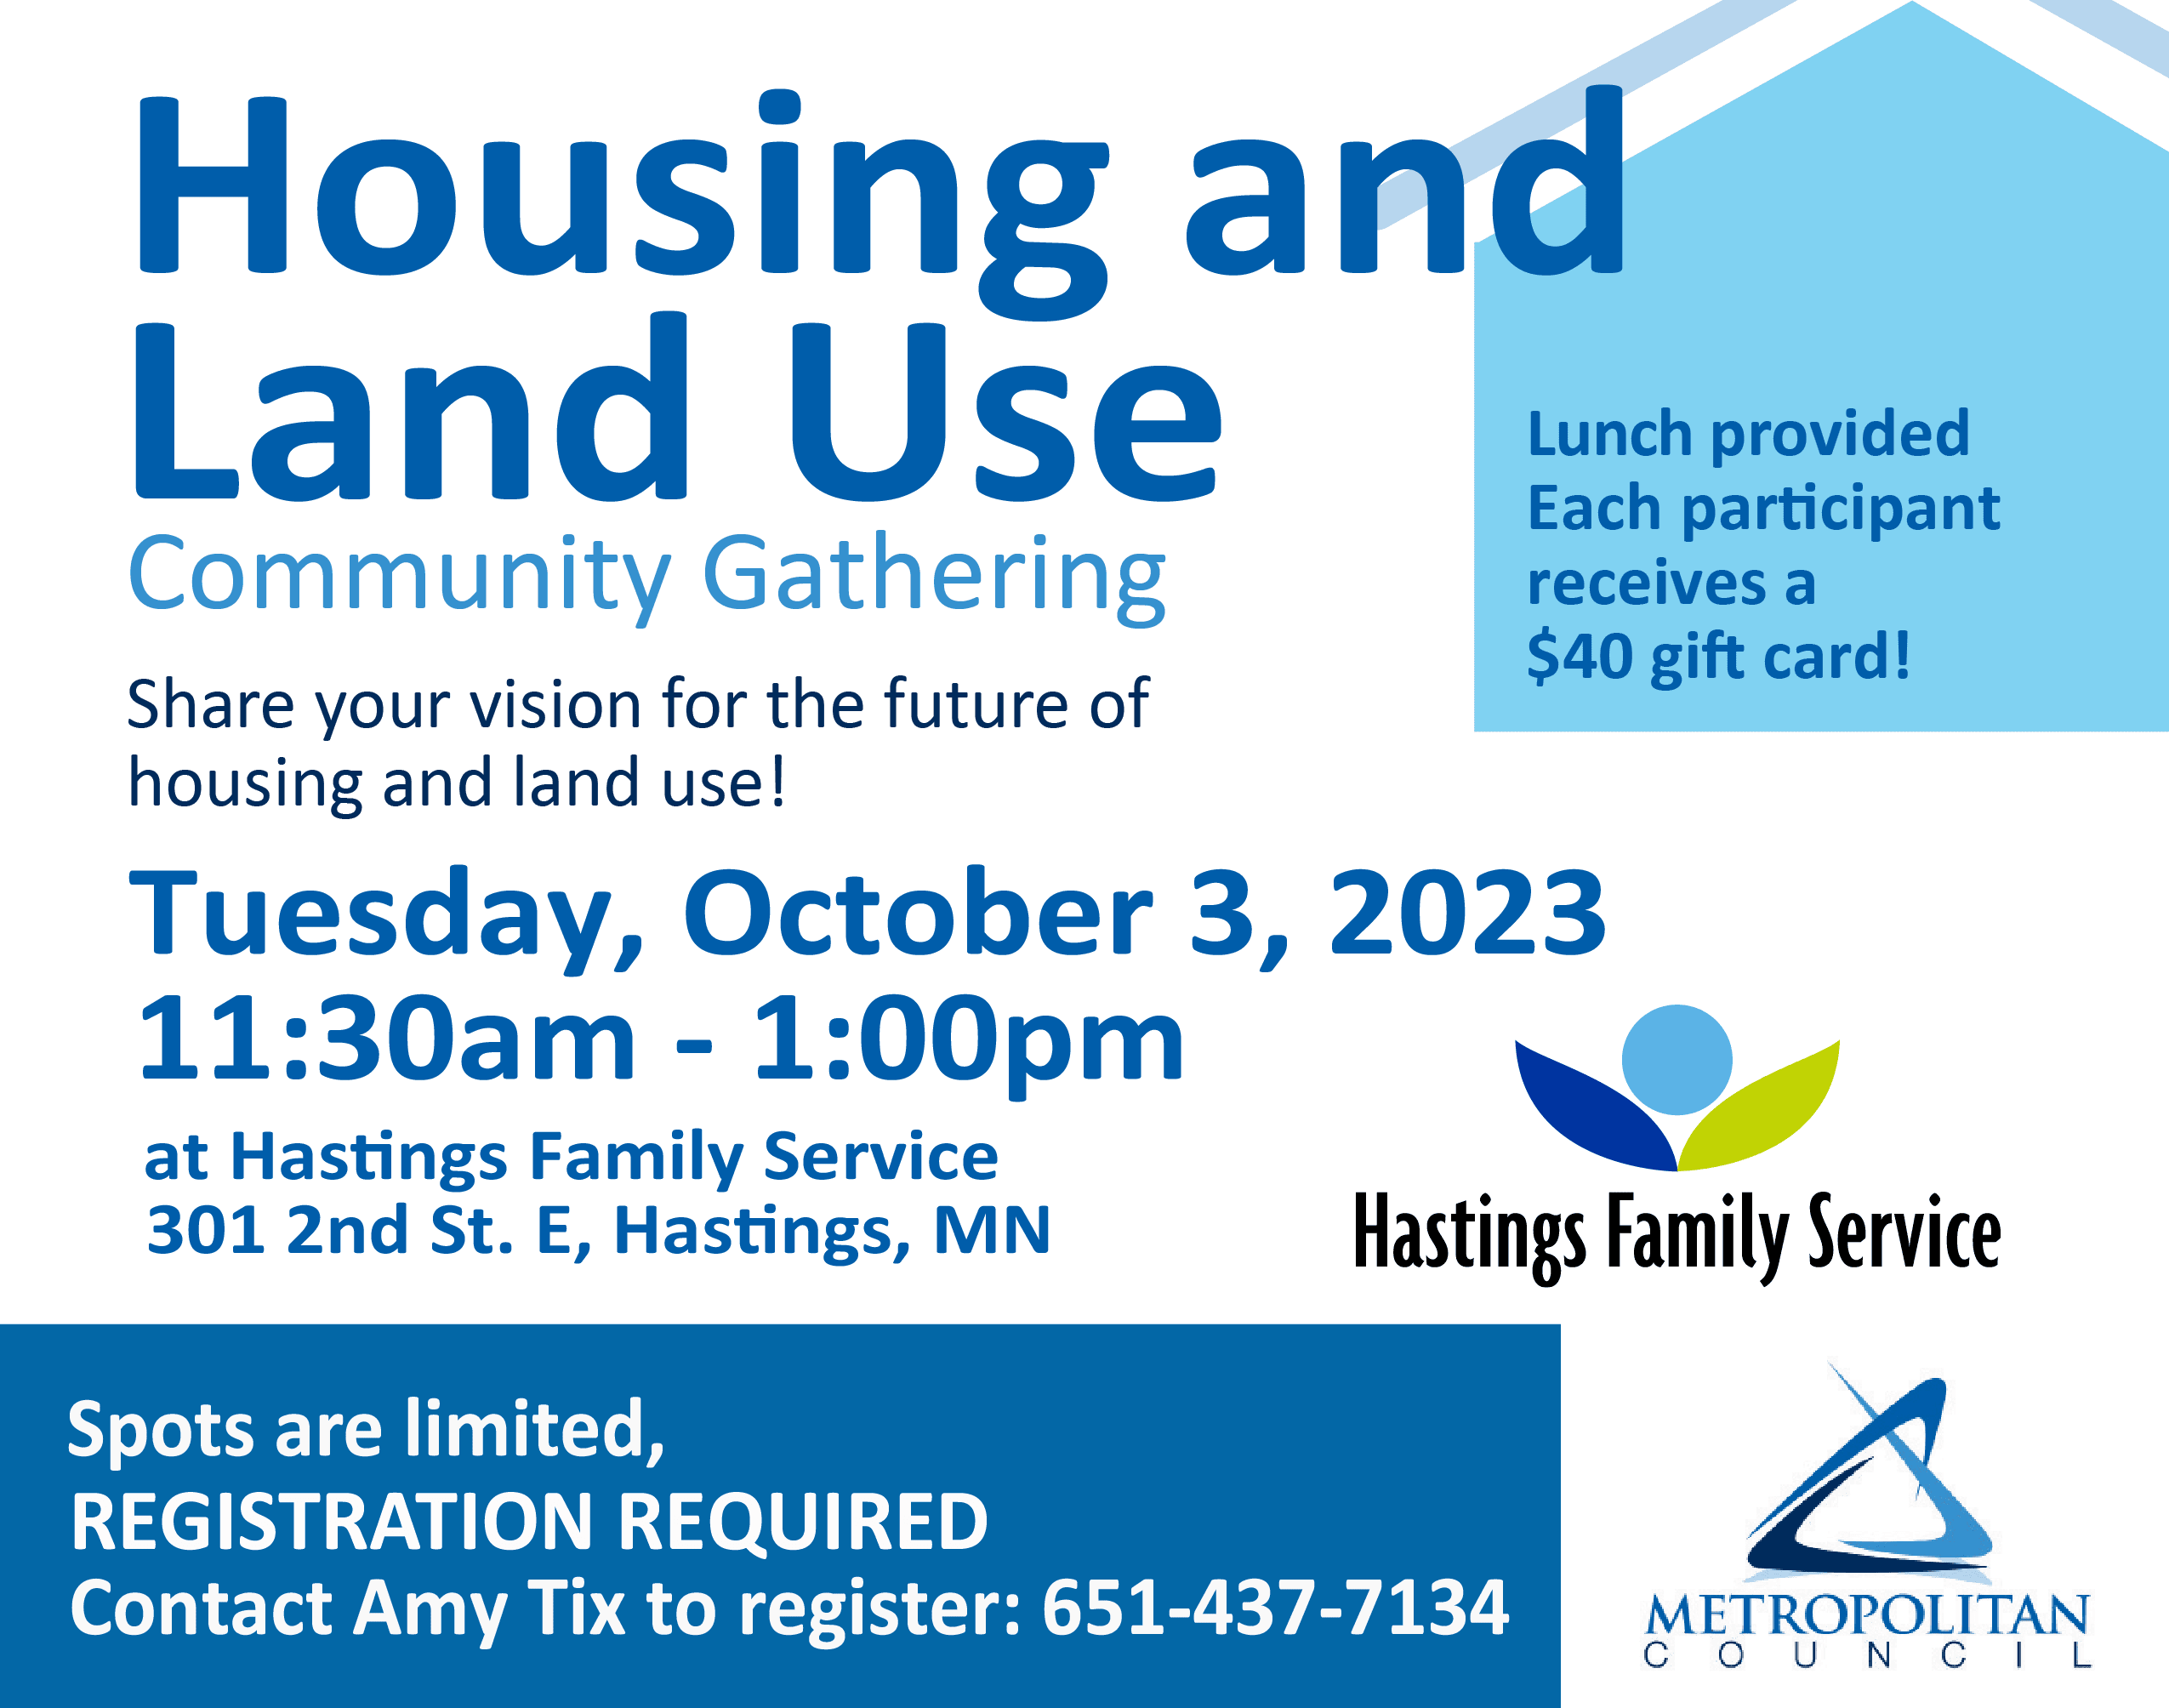 Housing and land use community gathering graphic, text "share your vision for the future of housing and land use" please see webpage for details